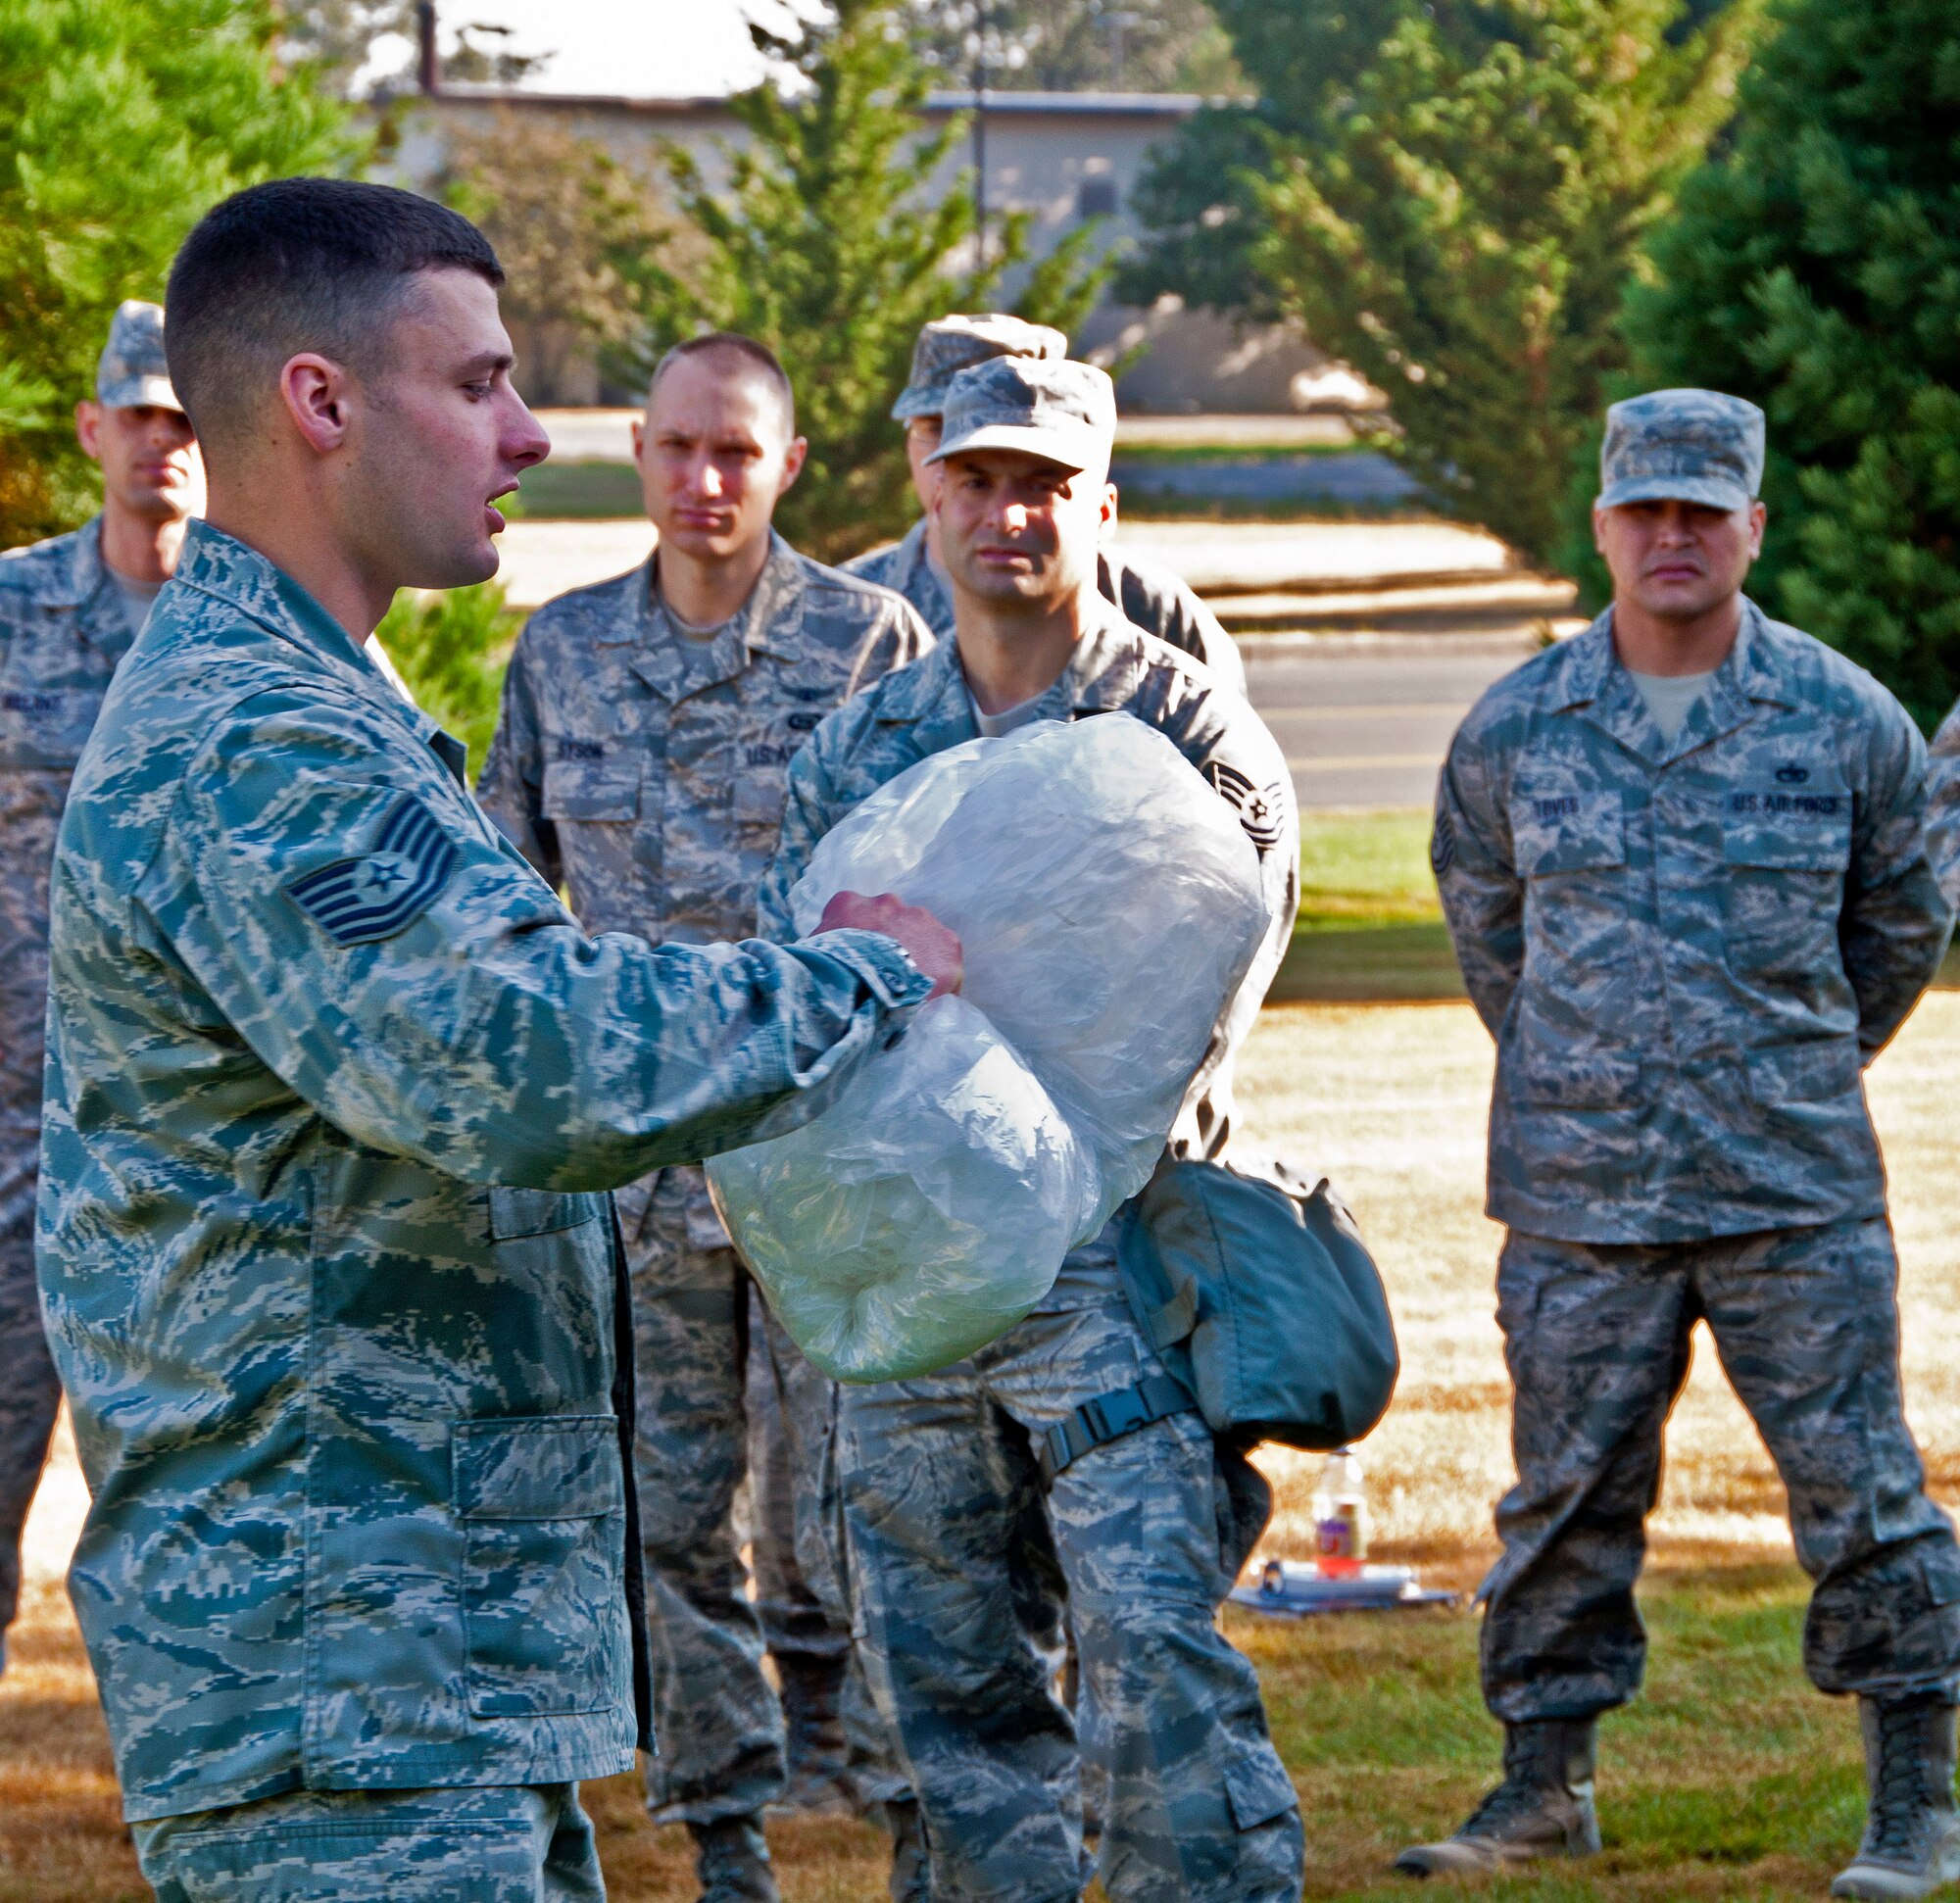 Tech. Sgt Justin Shattuck, 446th Civil Engineer Squadron emergency manager, shows Citizen Airmen how to properly dispose of contaminated materials during a training session held here Aug. 12, 2012.  The training enhances the wing's readiness and ability to succeed as they focus on preparing for the Operational Readiness Inspection in October 2012. (U.S. Air Force photo by Tech. Sgt. Tanya King)